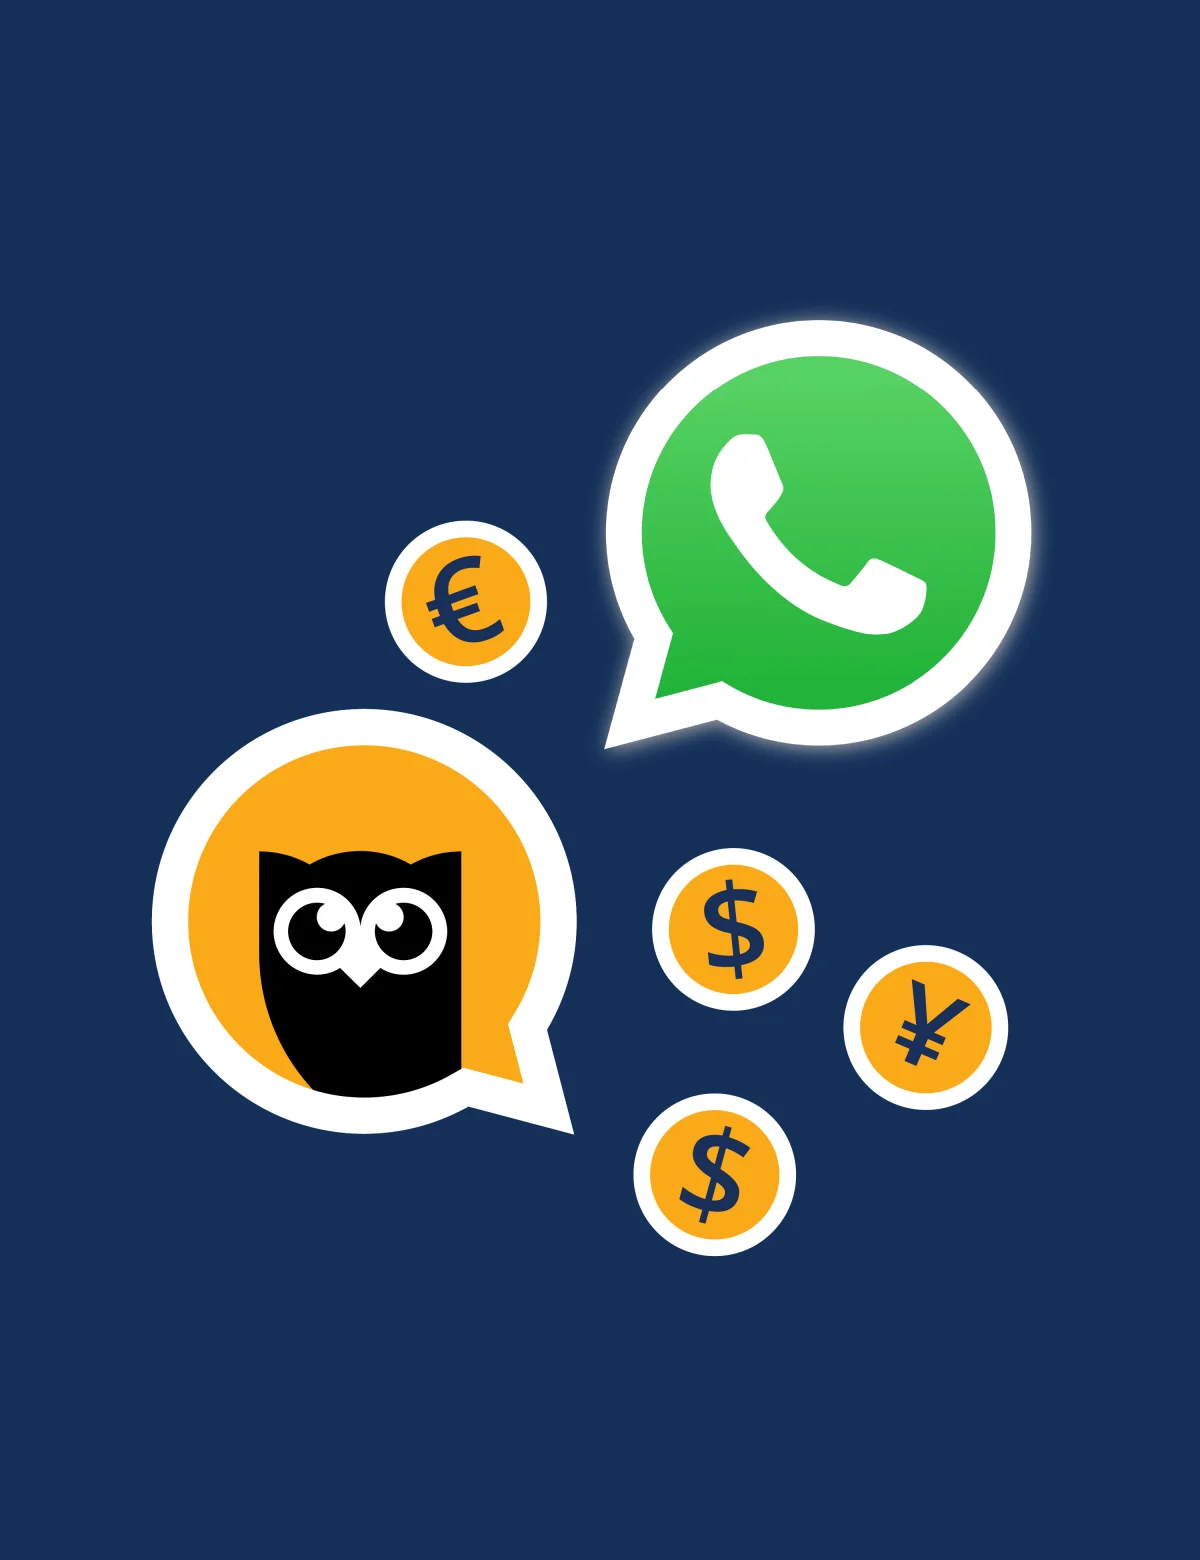 Speech bubbles with the hootsuite logo, a phone icon, and different currency symbols inside them